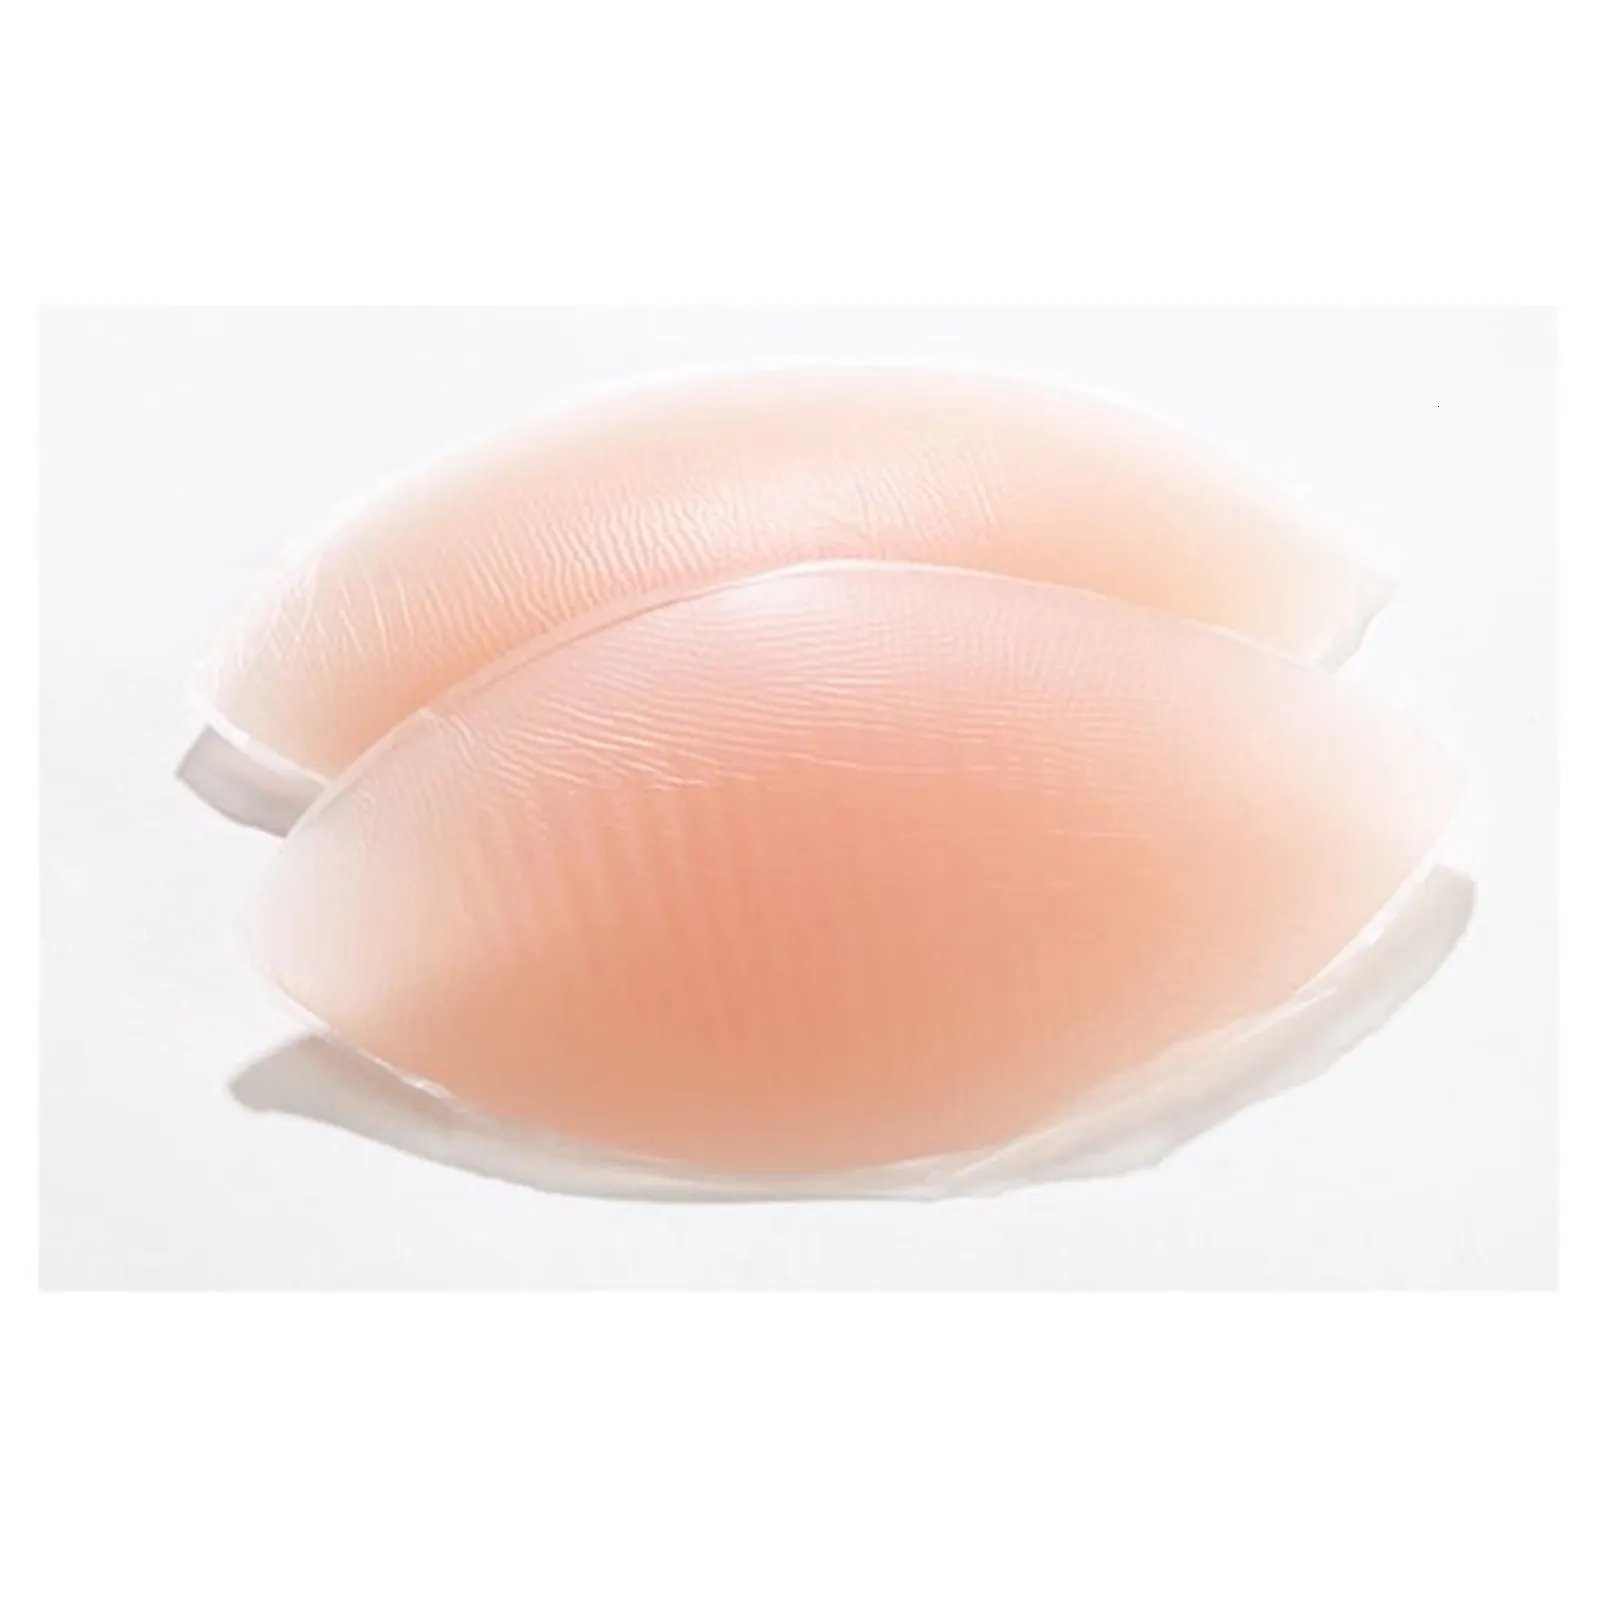 Chicken Fillets Silicone Breast Enhancers Bra Insert Pad Silicone